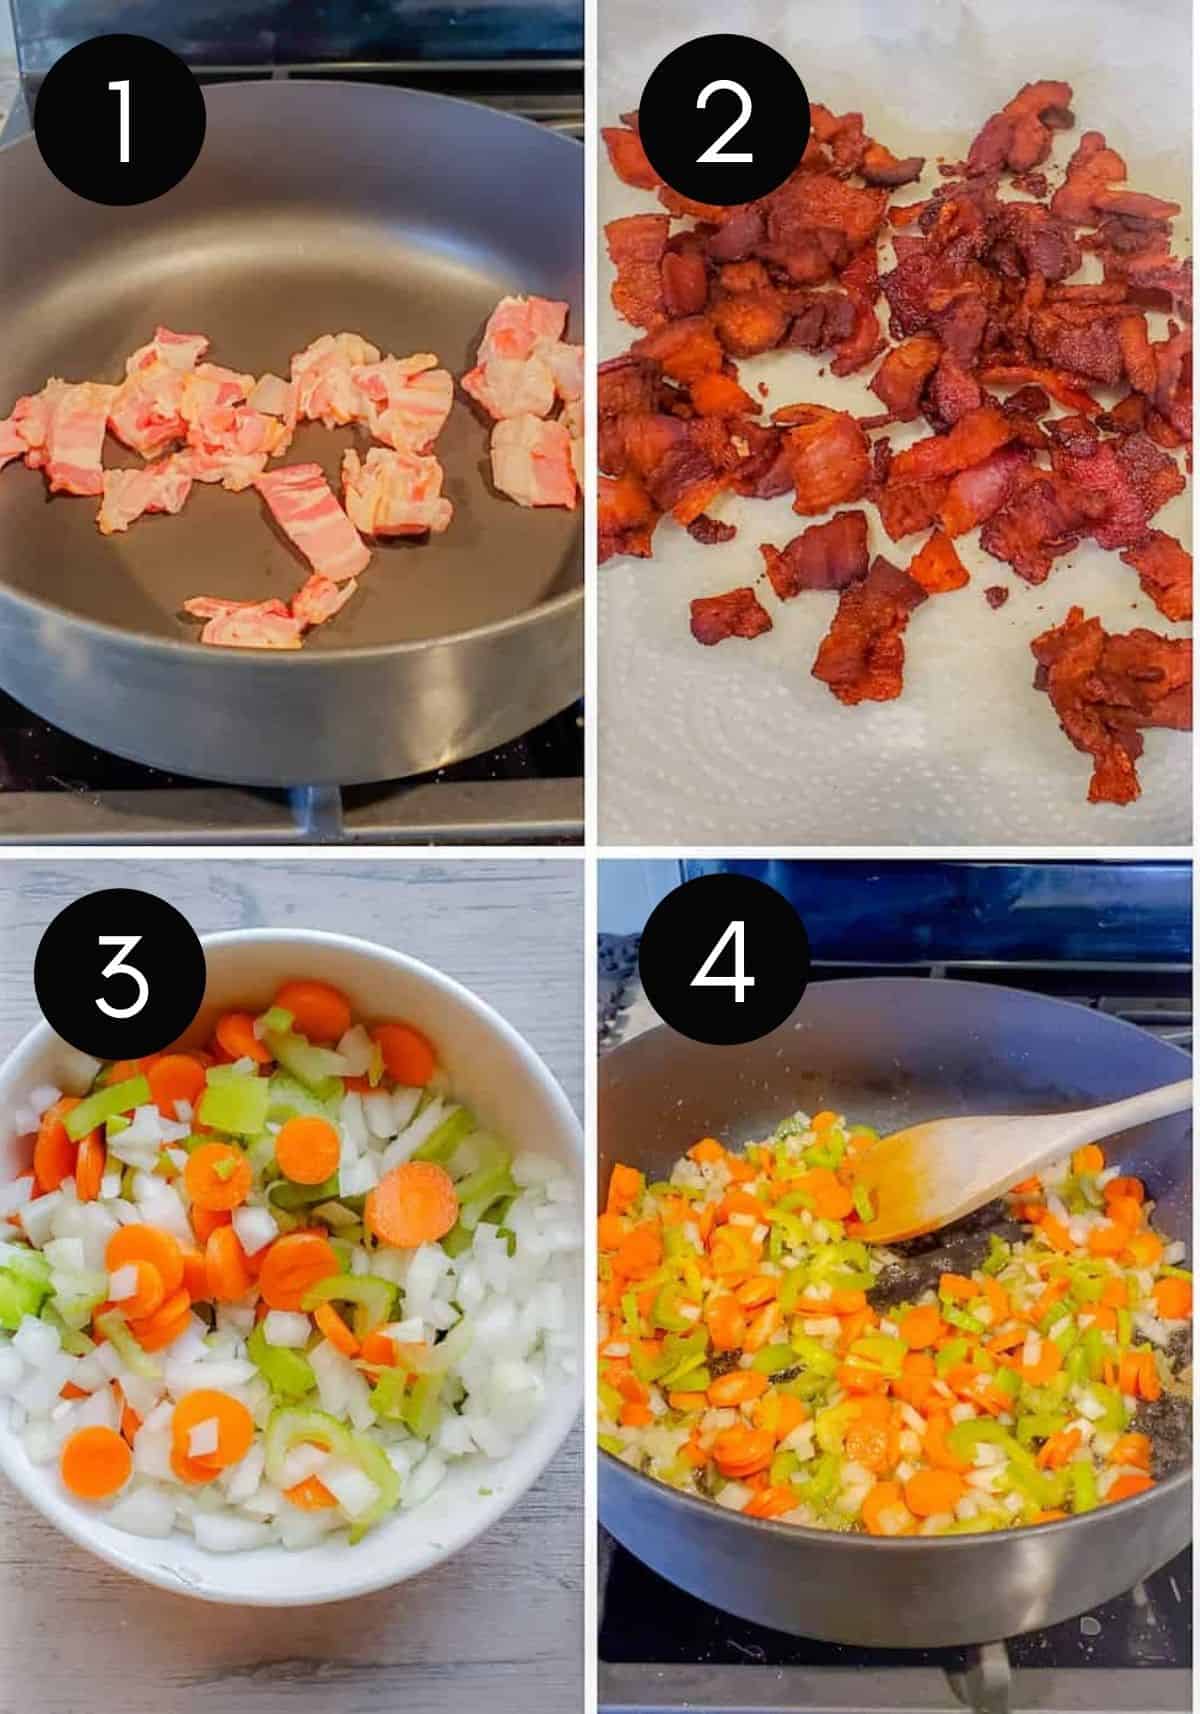 Four prep images of bacon and veggies cooking.